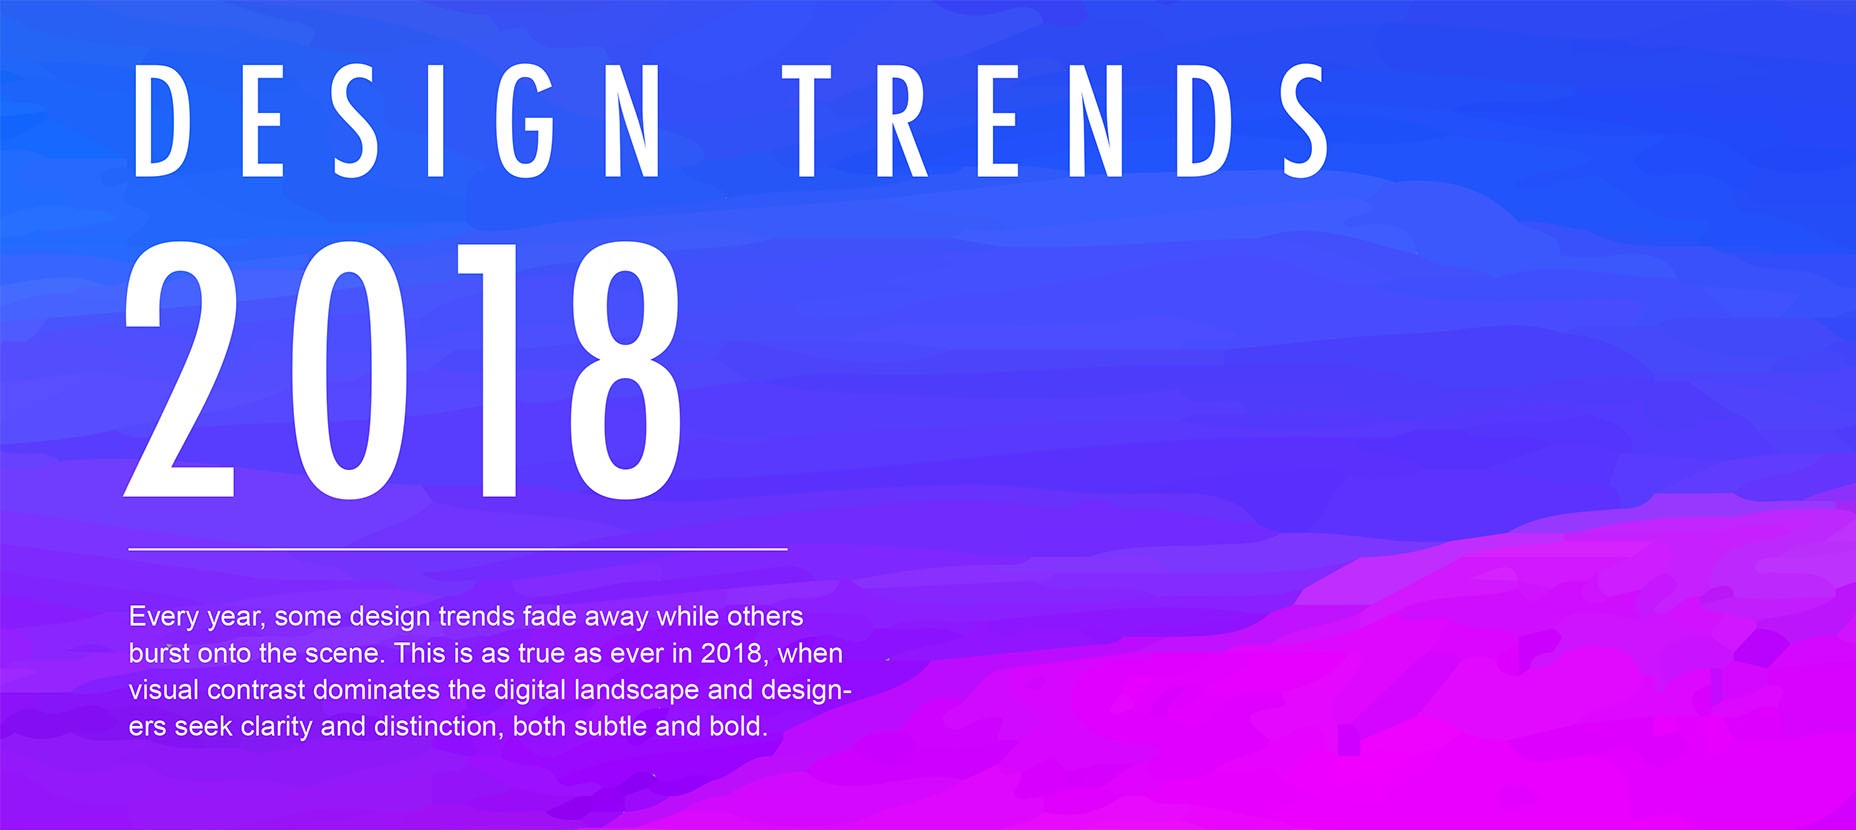 Guide: The Digital And Graphic Design Trends For 2018